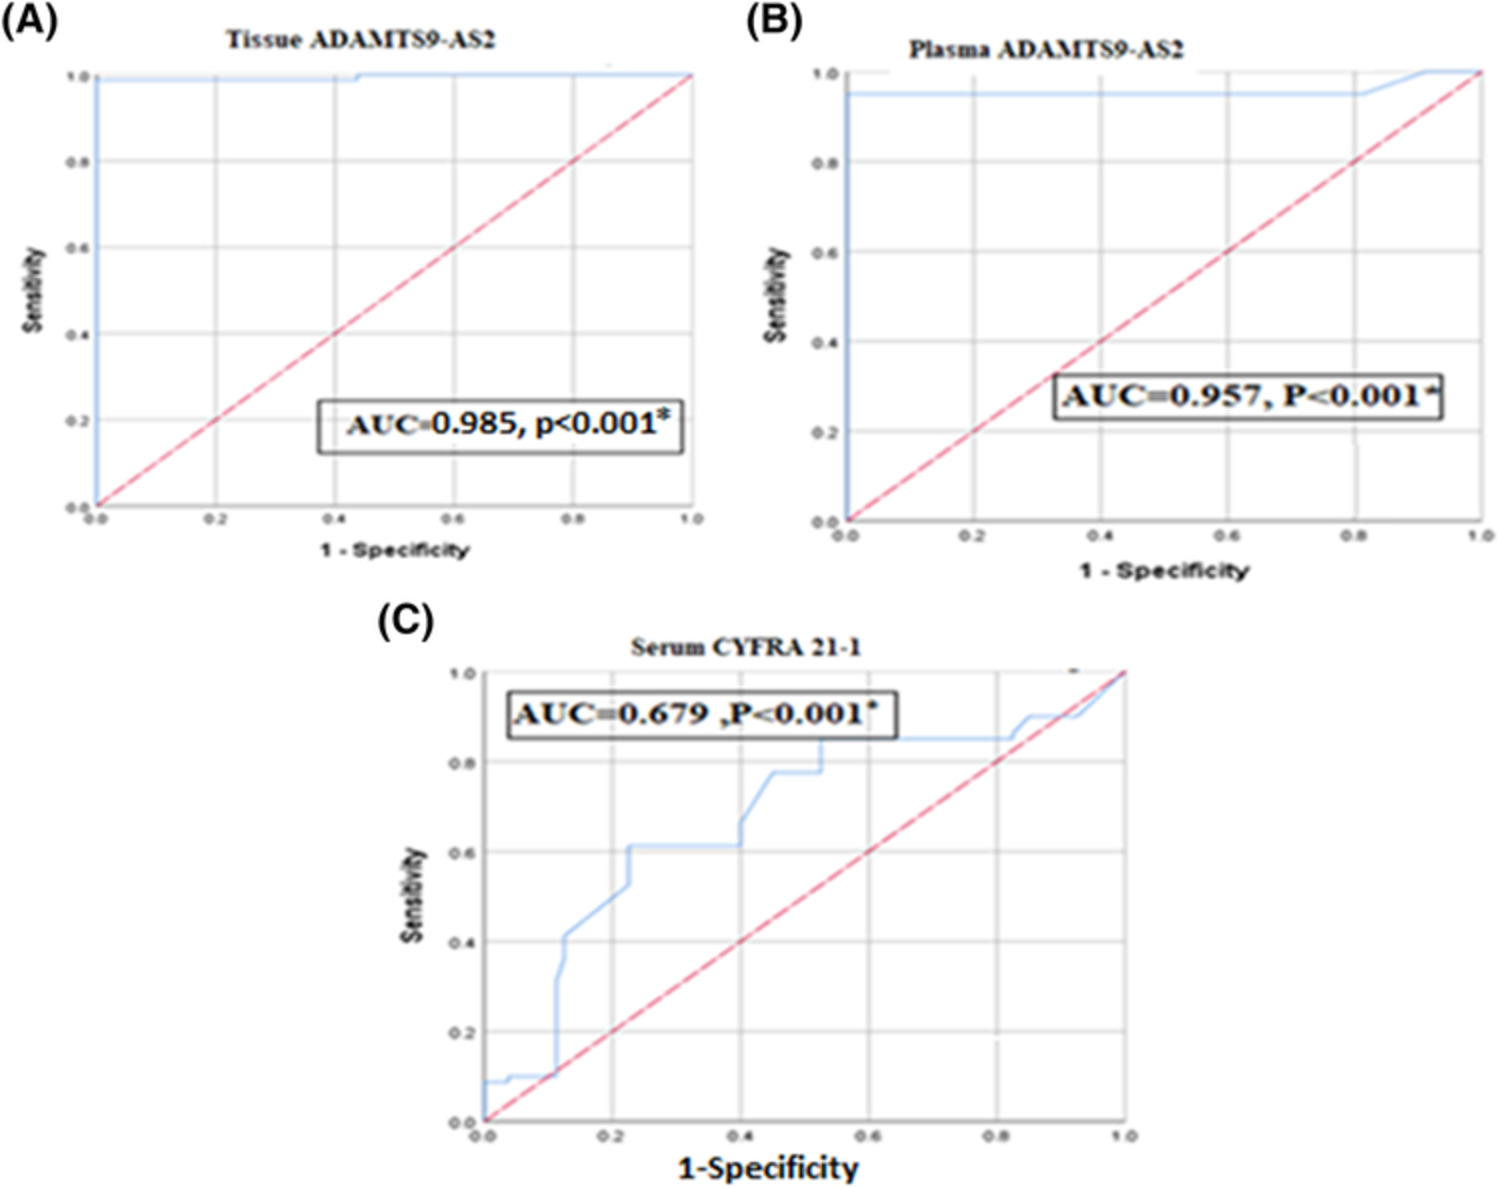 The diagnostic significance of circulating lncRNA ADAMTS9‐AS2 tumor biomarker in non‐small cell lung cancer among the Egyptian population